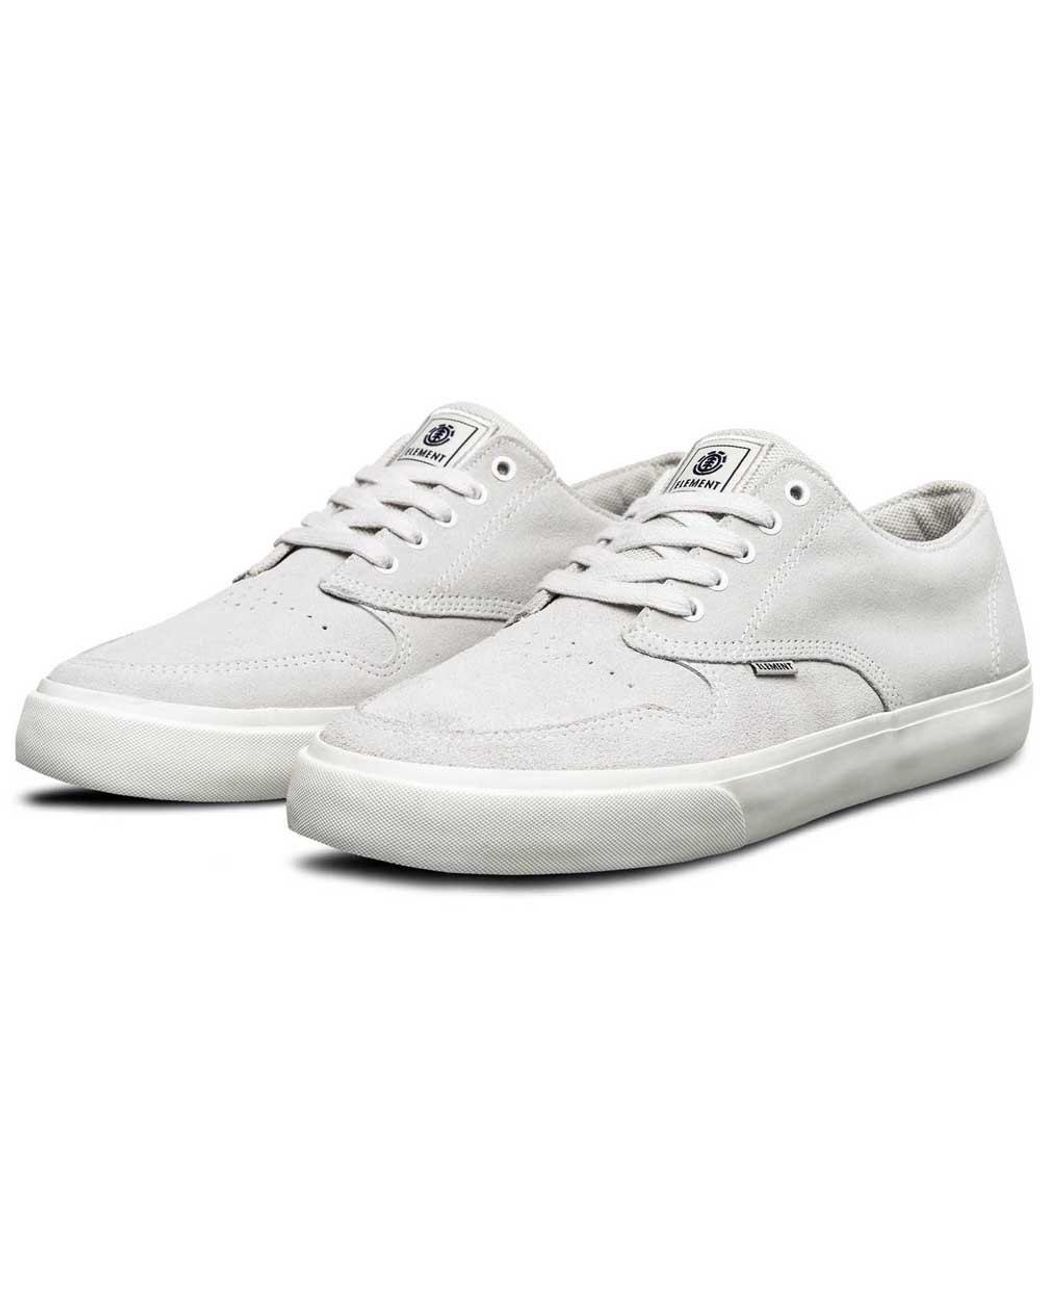 Element Suede Topaz C3 Trainers in Washed White (White) for Men - Lyst